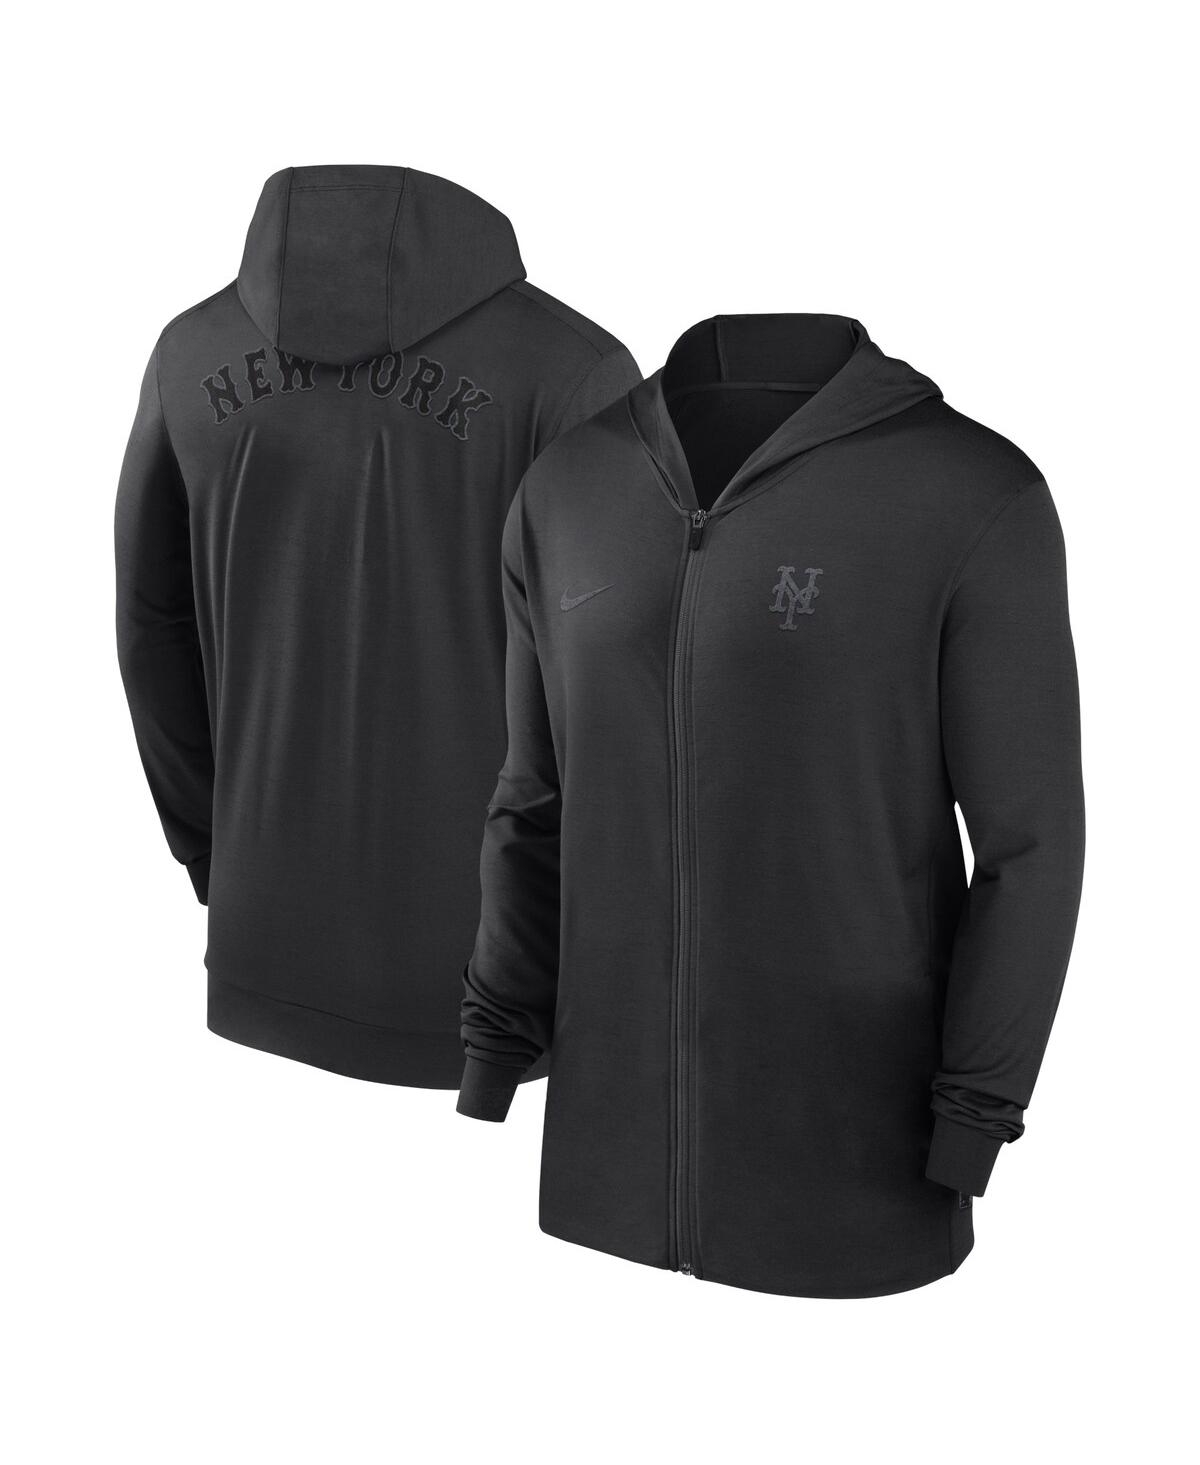 Shop Nike Men's  Black New York Mets Authentic Collection Travel Performance Full-zip Hoodie